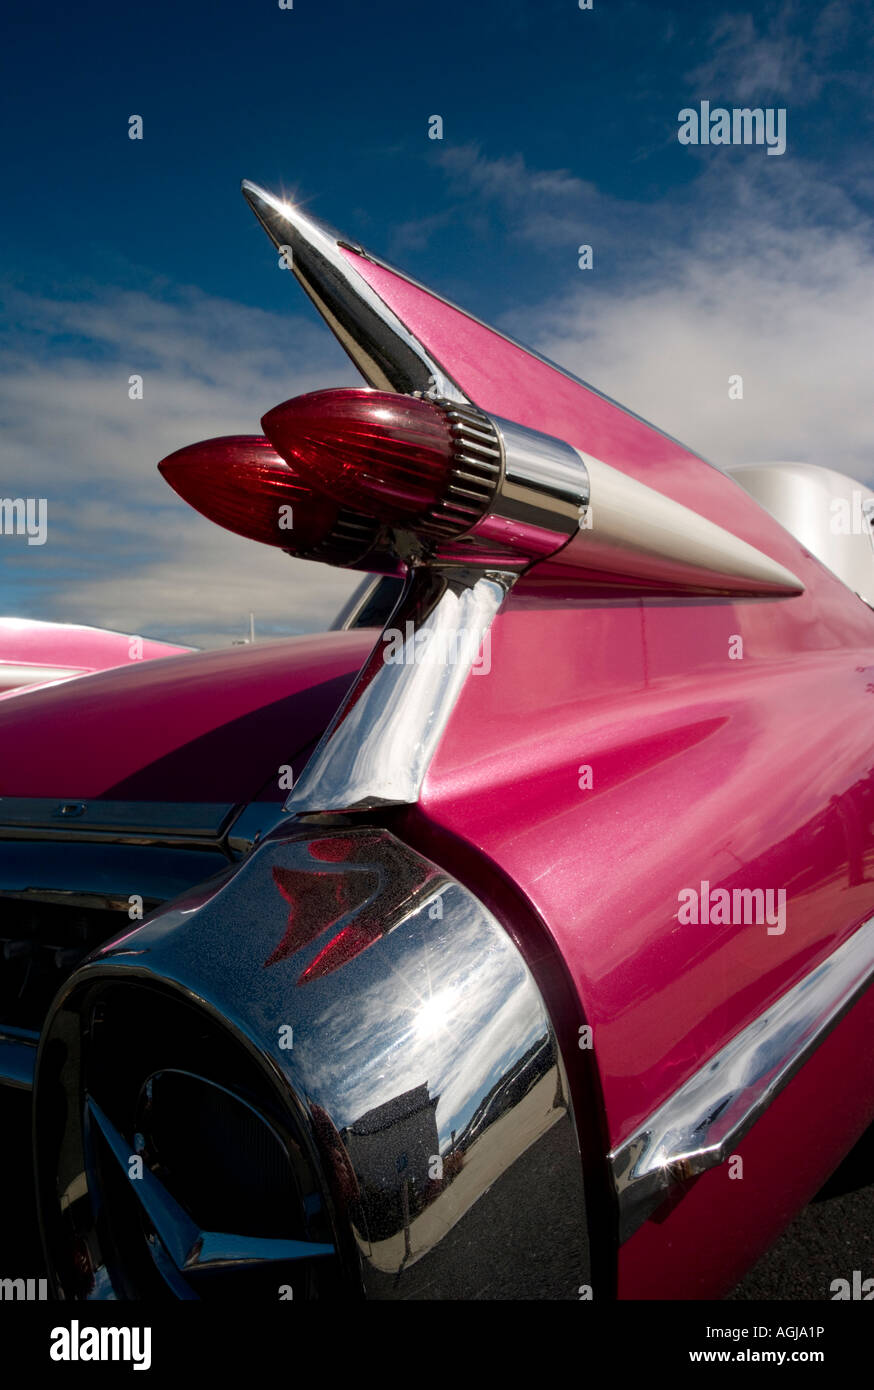 Iconic Chrome fins and tail lights on a pink 1959 Cadillac Coupe de Ville classic car with blue sky Stock Photo